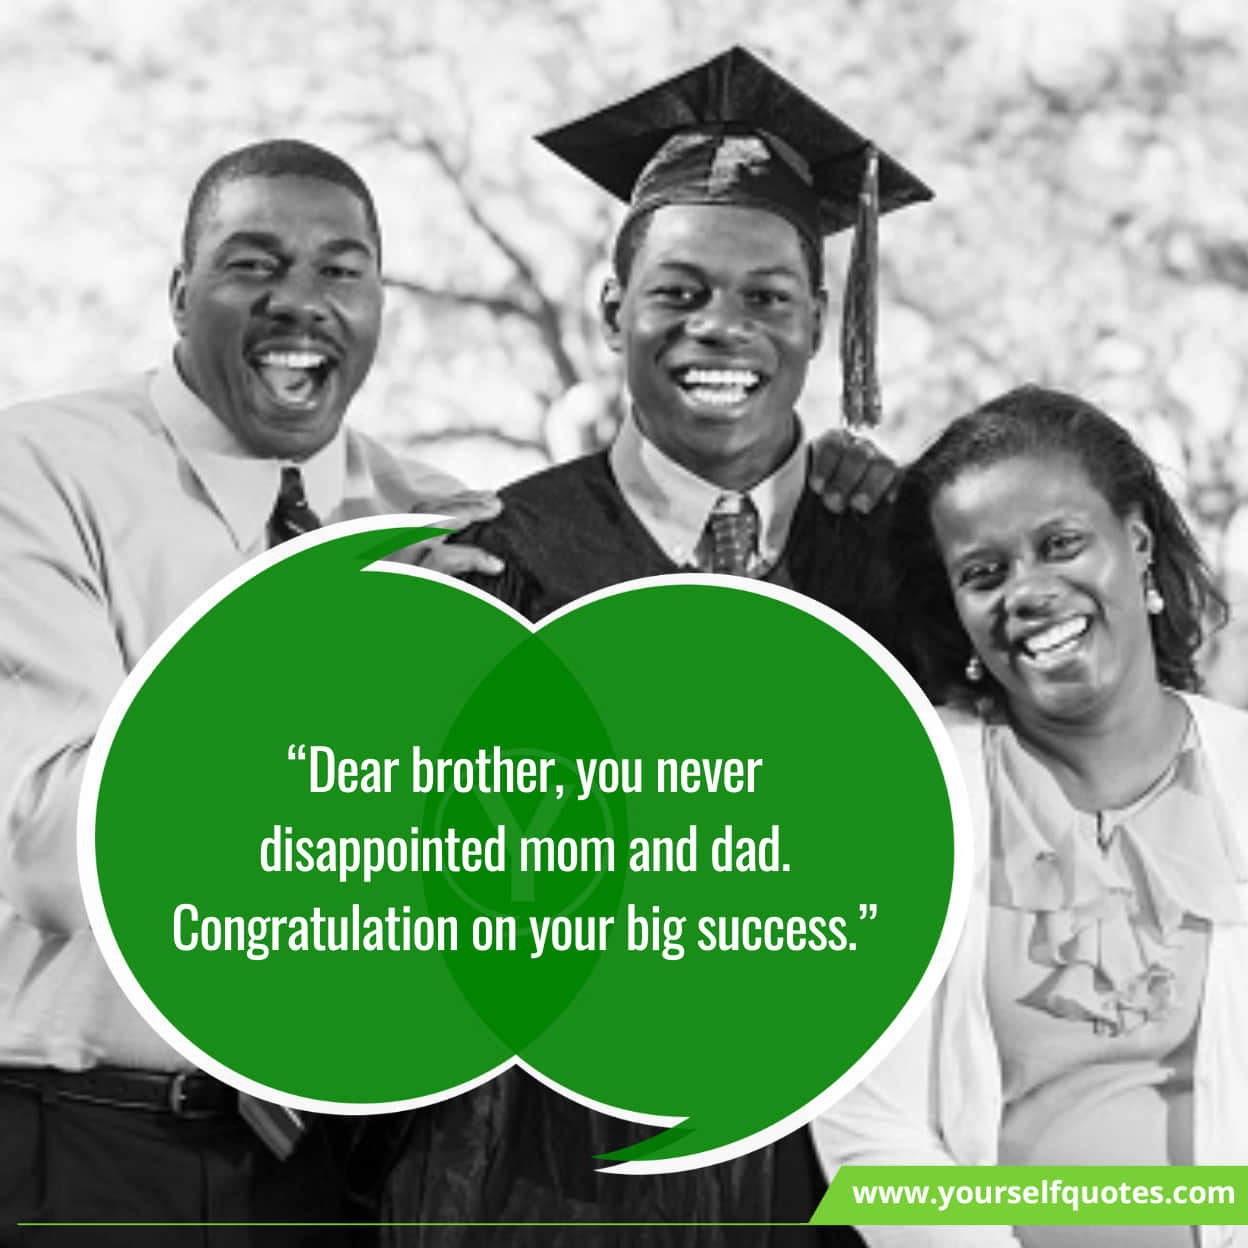 Wishes To Send To Brother On Graduation